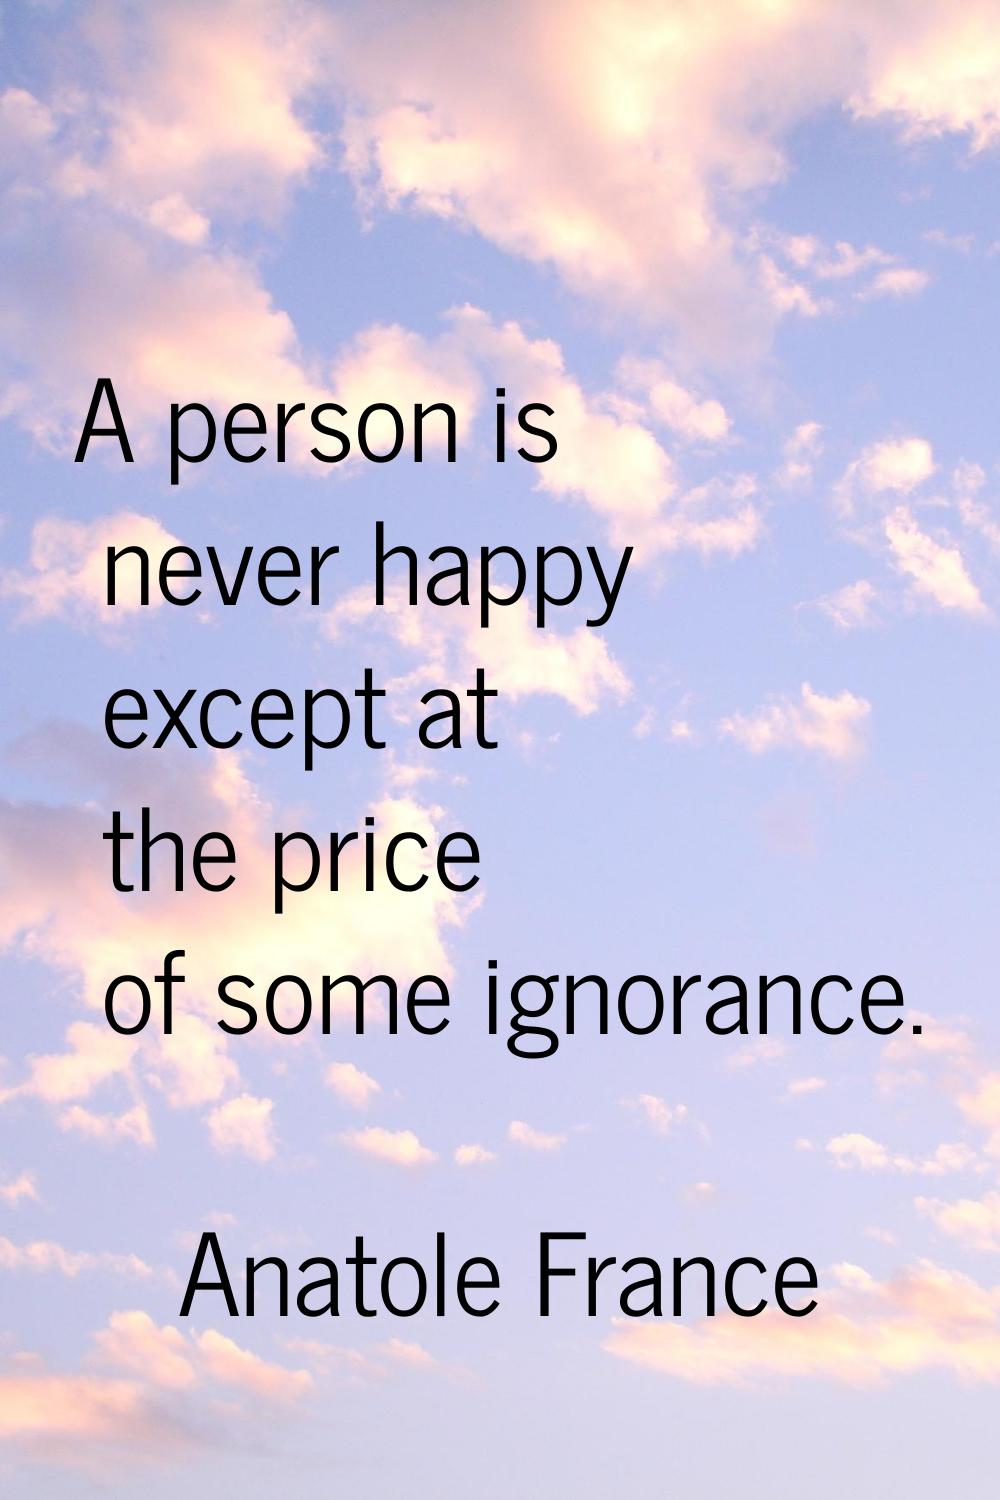 A person is never happy except at the price of some ignorance.